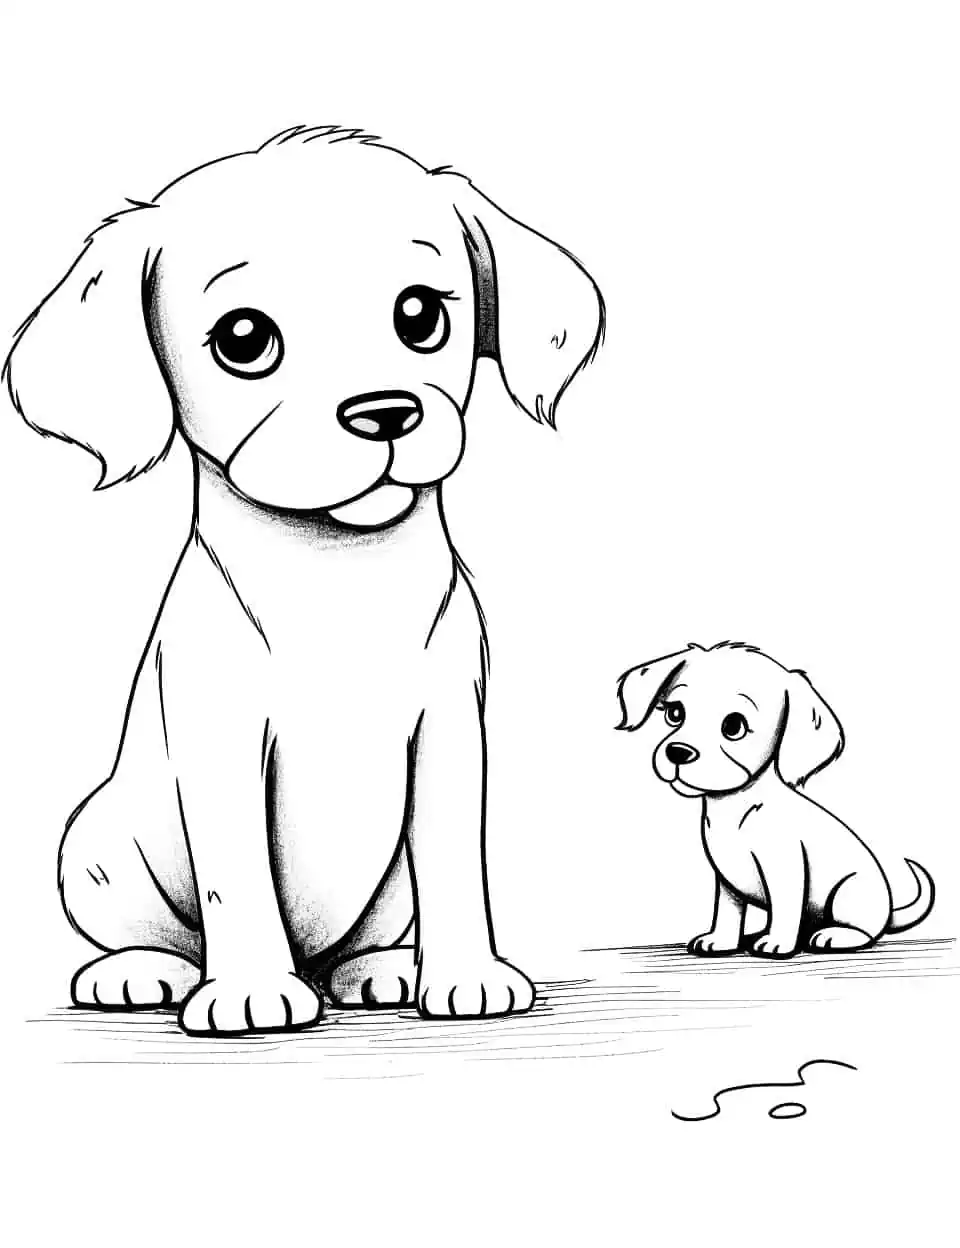 Baby Dog's First Steps Dog Coloring Page - A baby dog (puppy) taking its first steps while its sibling watches.